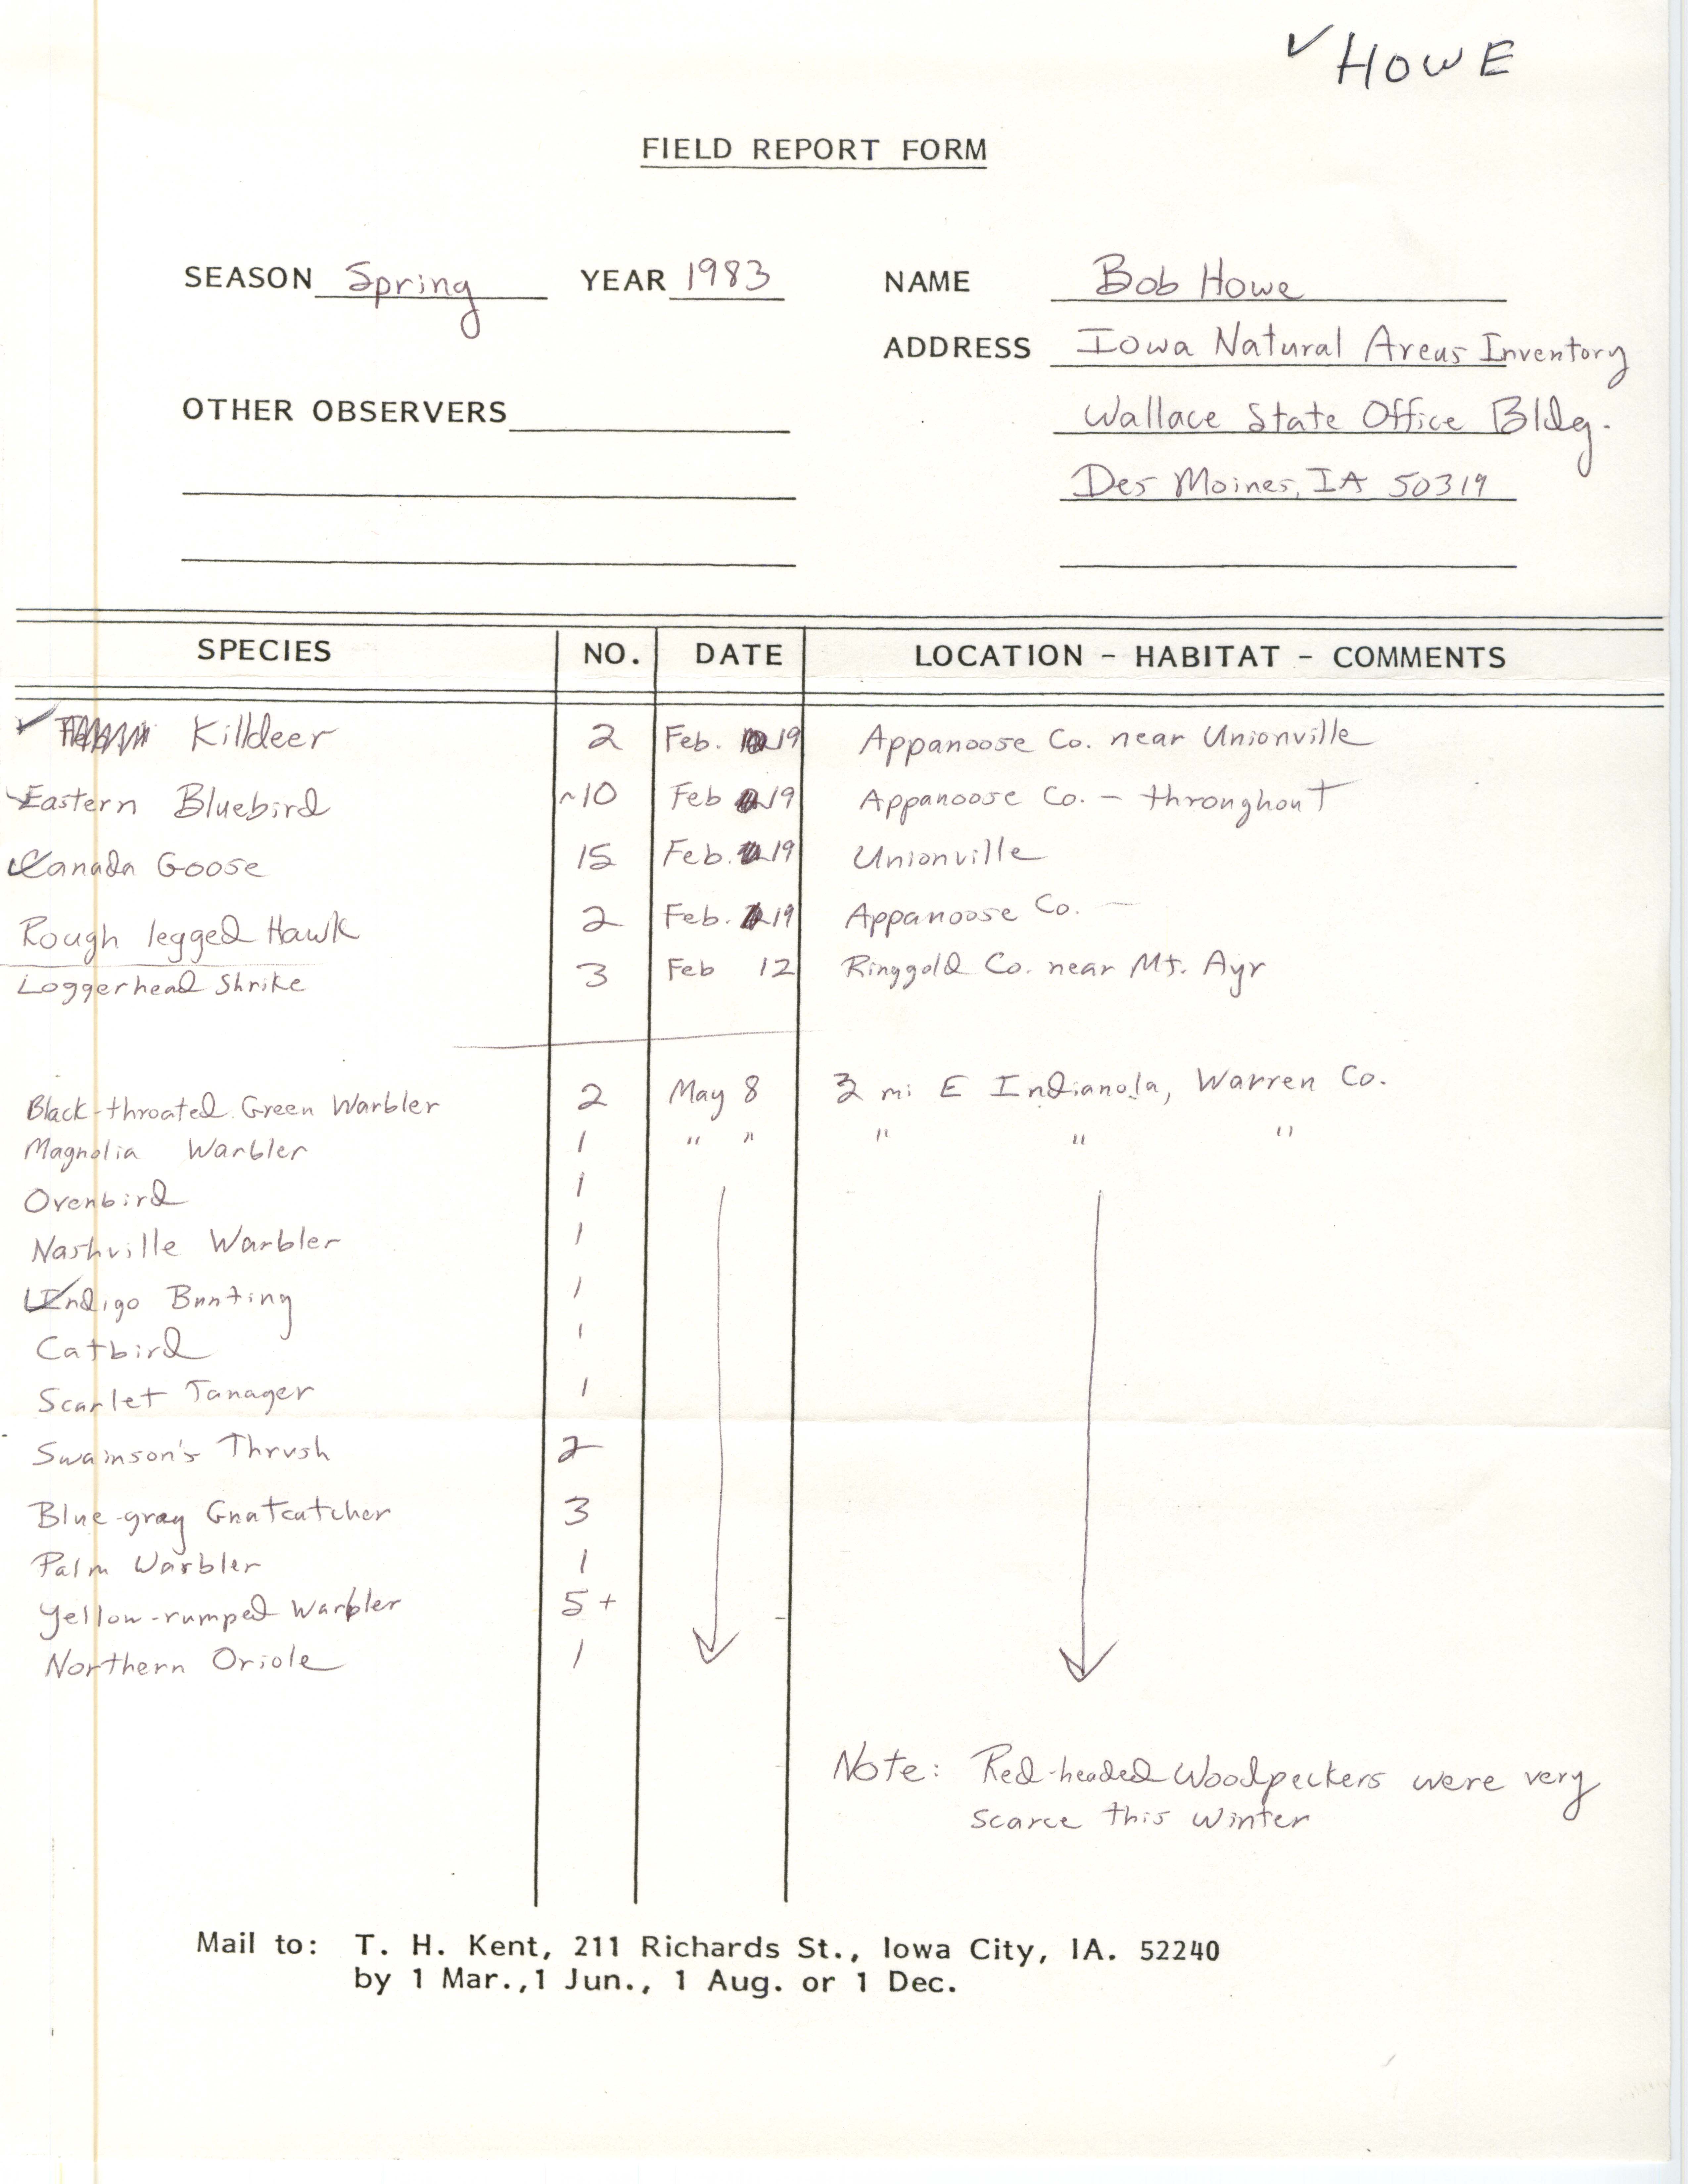 Field report form contributed by Robert W. Howe, spring 1983